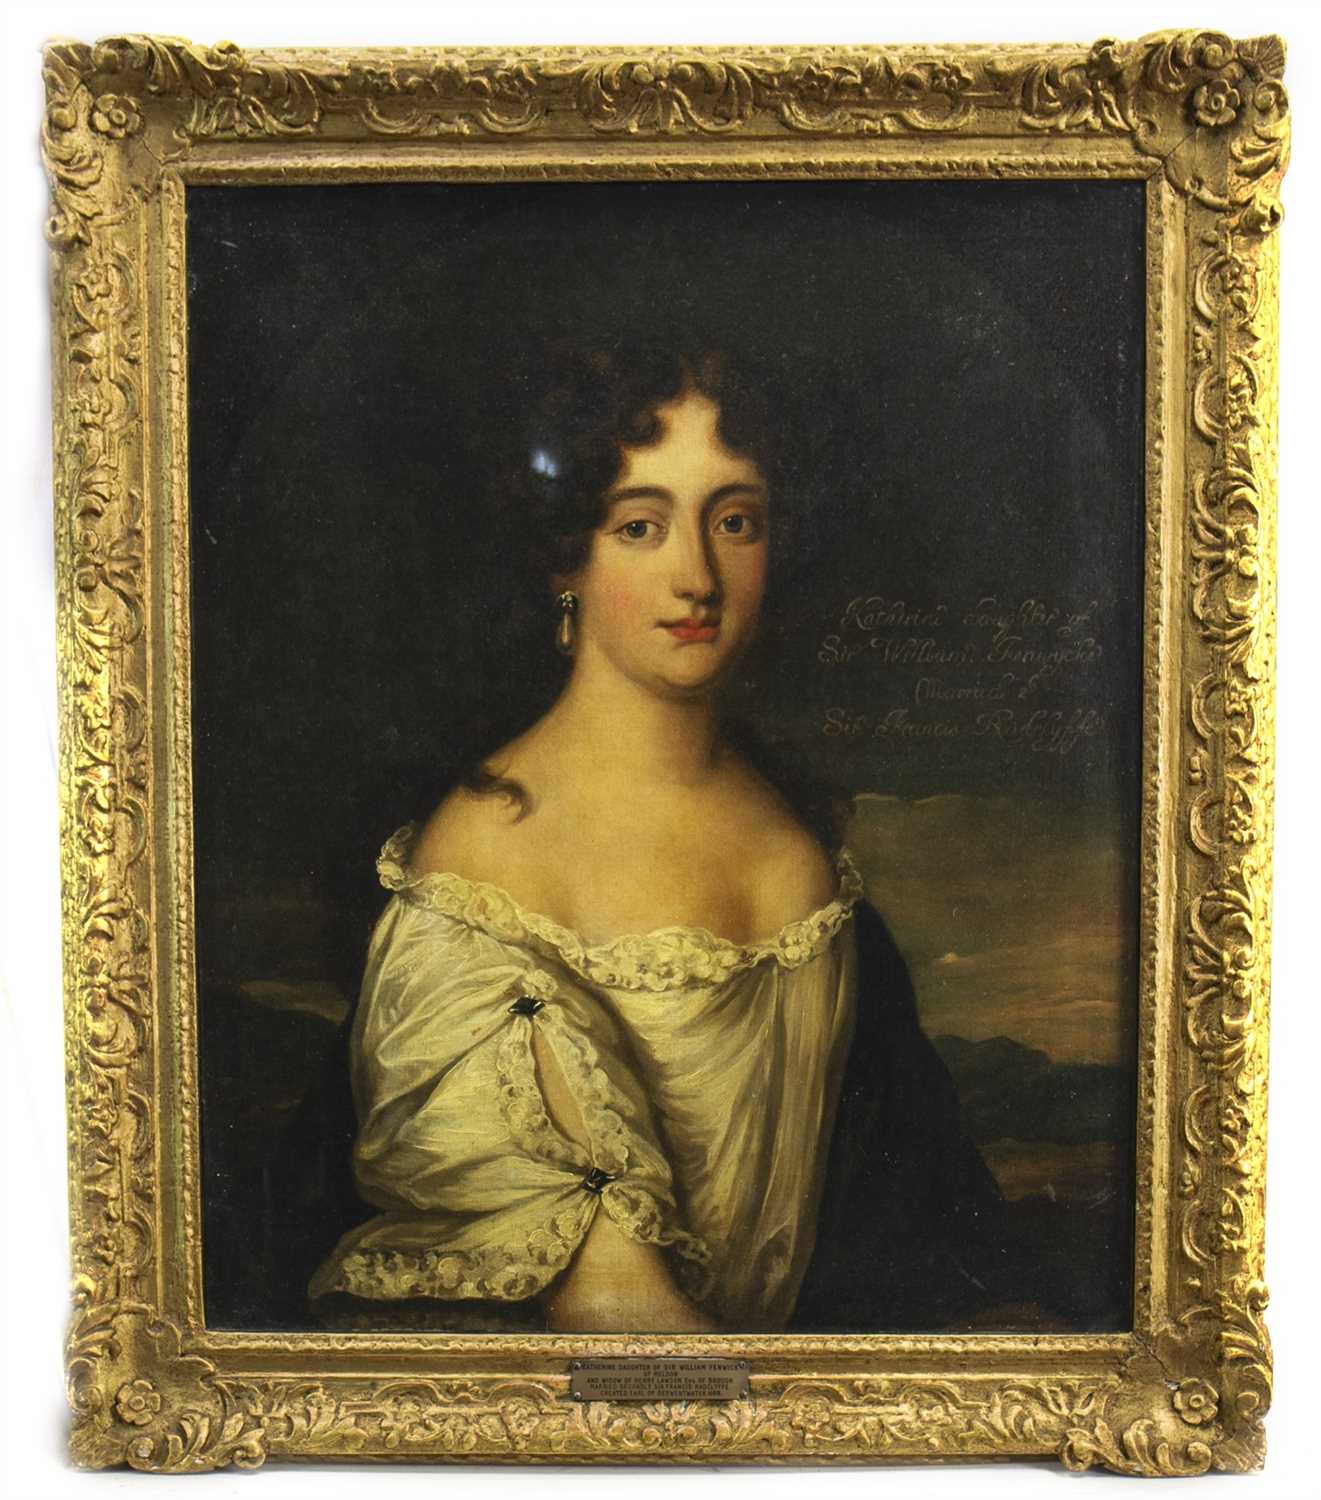 Lot 430 - KATHERINE, DAUGHTER OF SIR WILLIAM FENWICK, AN OIL